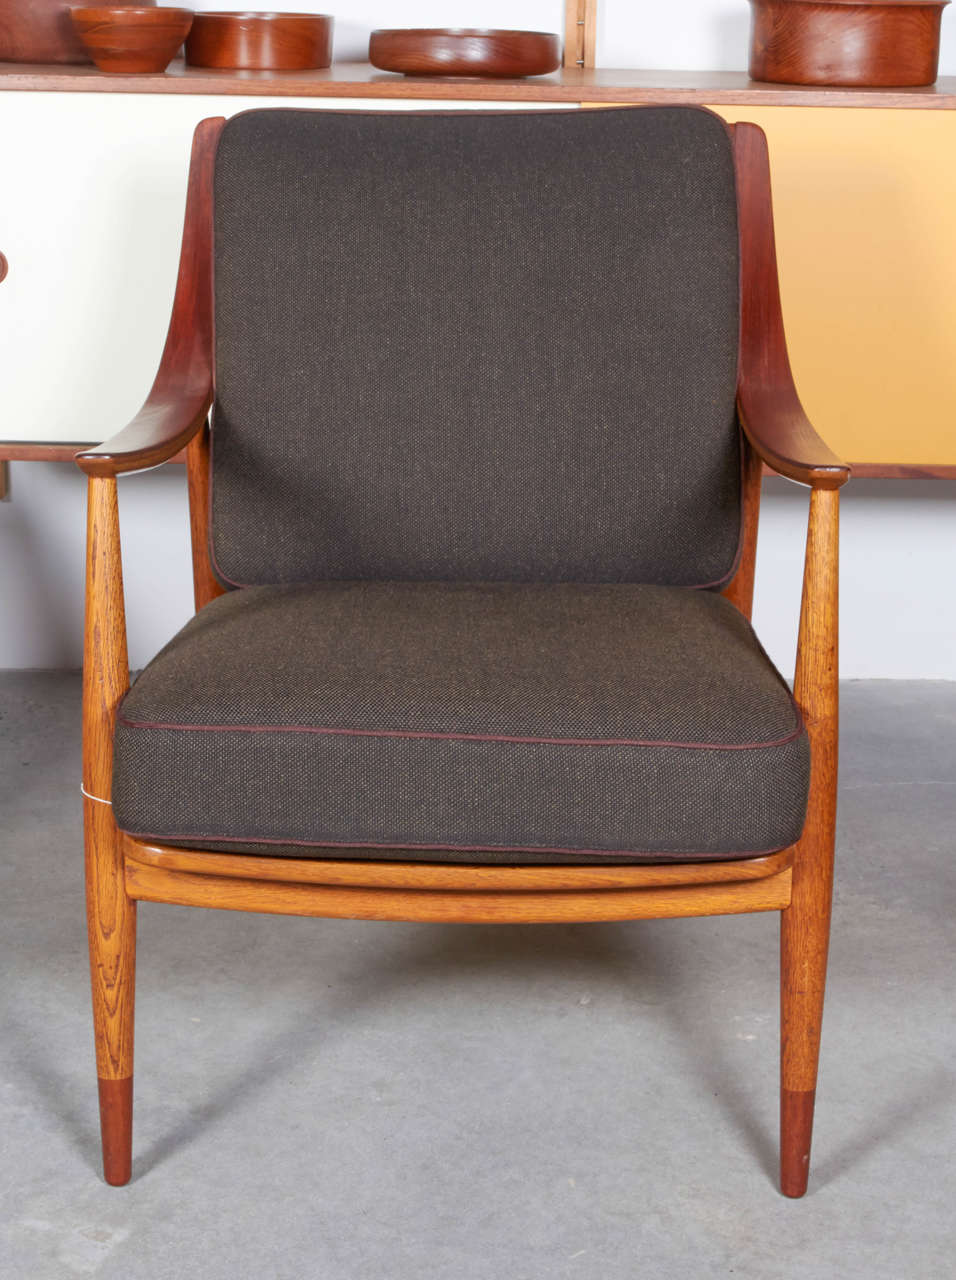 Vintage 1950s Hvidt & Molgaard Armchair

This Danish Lounge Chair is in like new condition. The steam bent aren are made of oak with a layer of teak on top. The rest of the chair continues with the solid oak and finishes with teak feet. The chair,